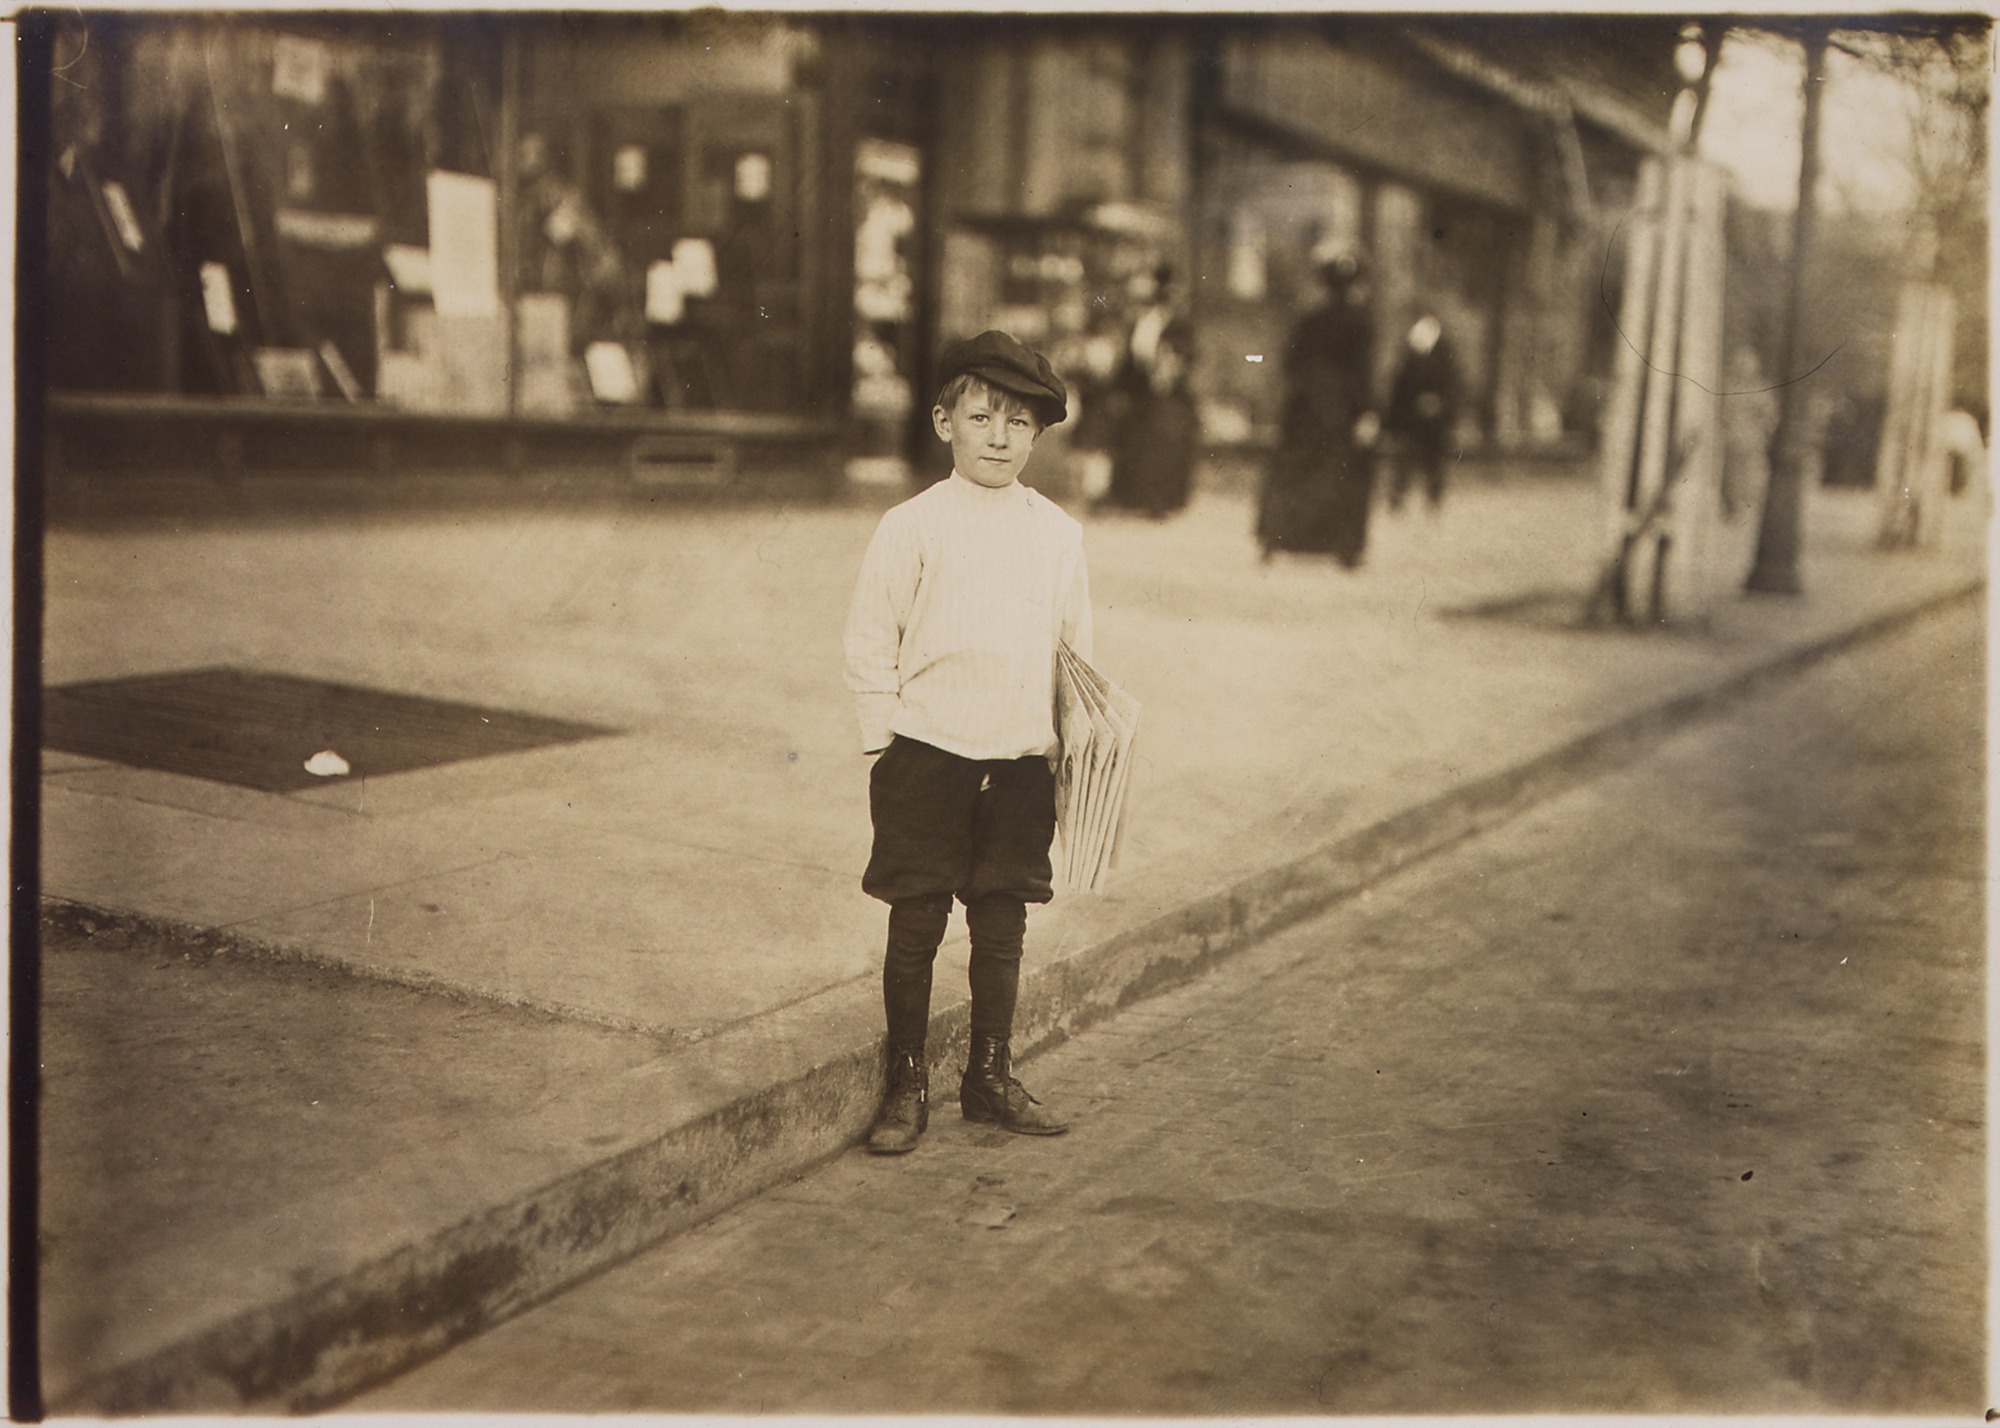 Photograph of William Lerch, 7 year old news-boy who sells for his brother. - NARA - 306625